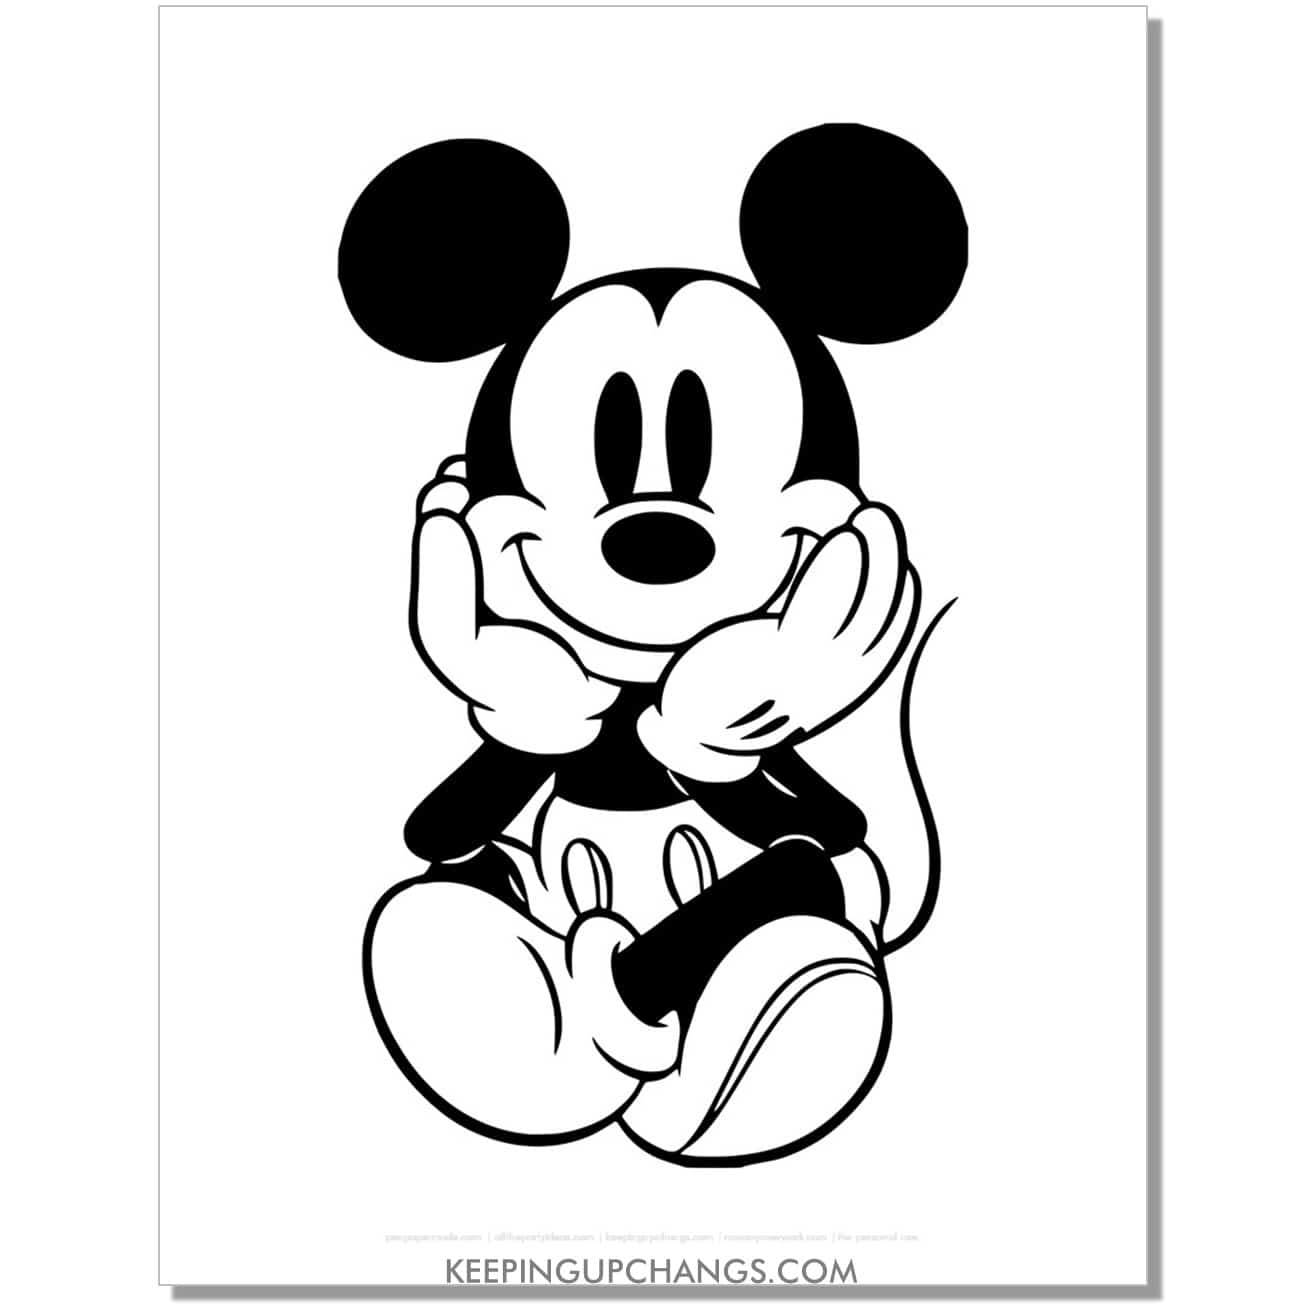 free vintage, old fashioned mickey mouse coloring page, sheet.